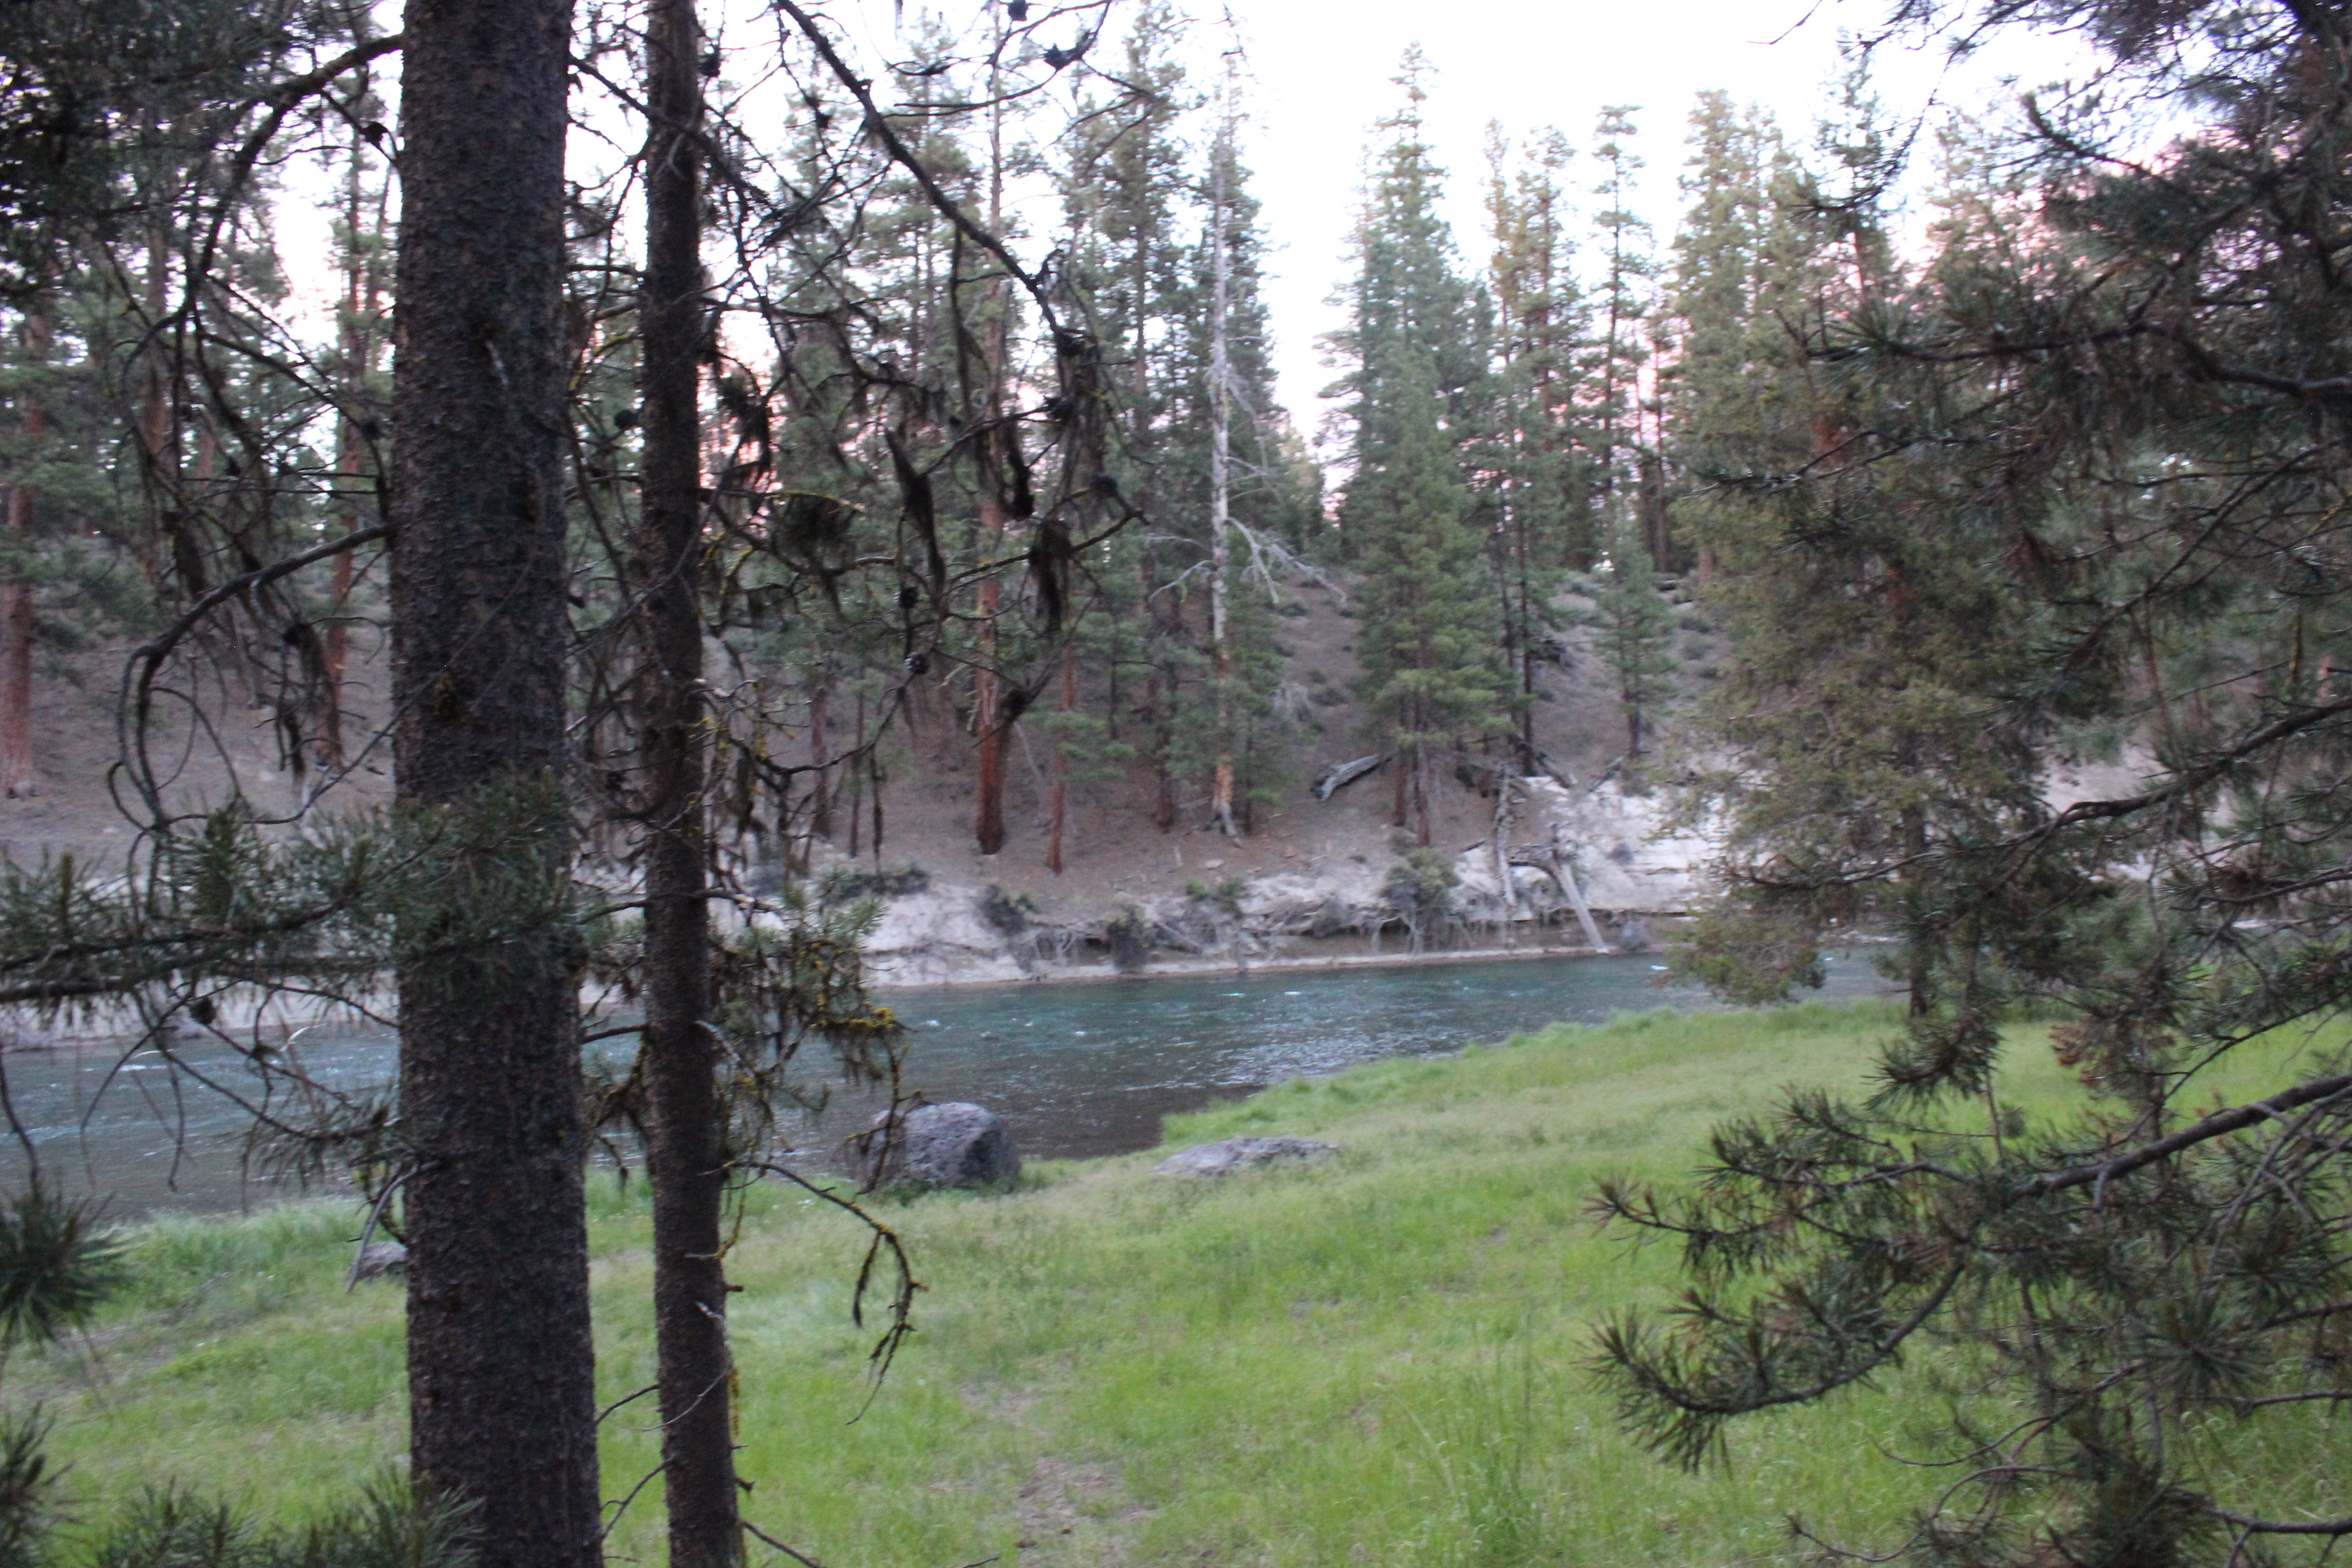 Camper submitted image from Pringle Falls Campground - 2